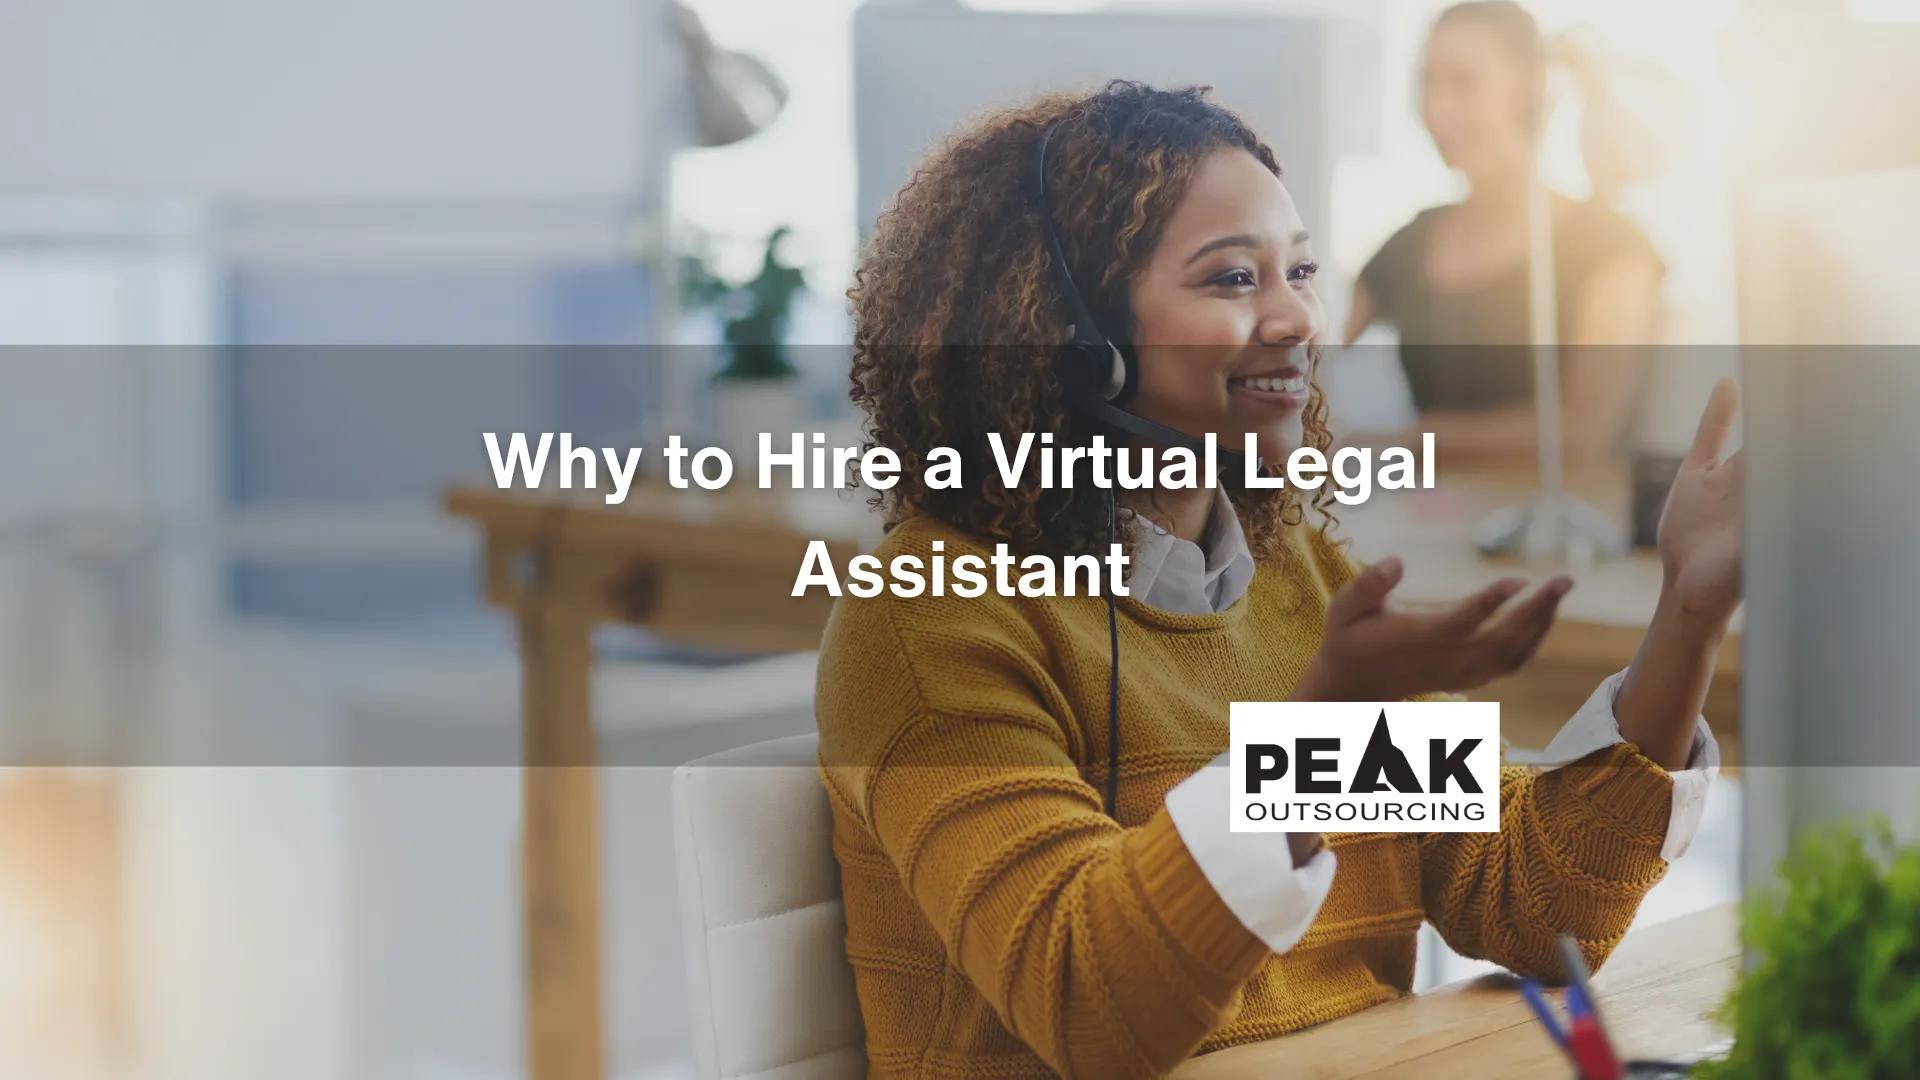 Why to Hire a Virtual Legal Assistant